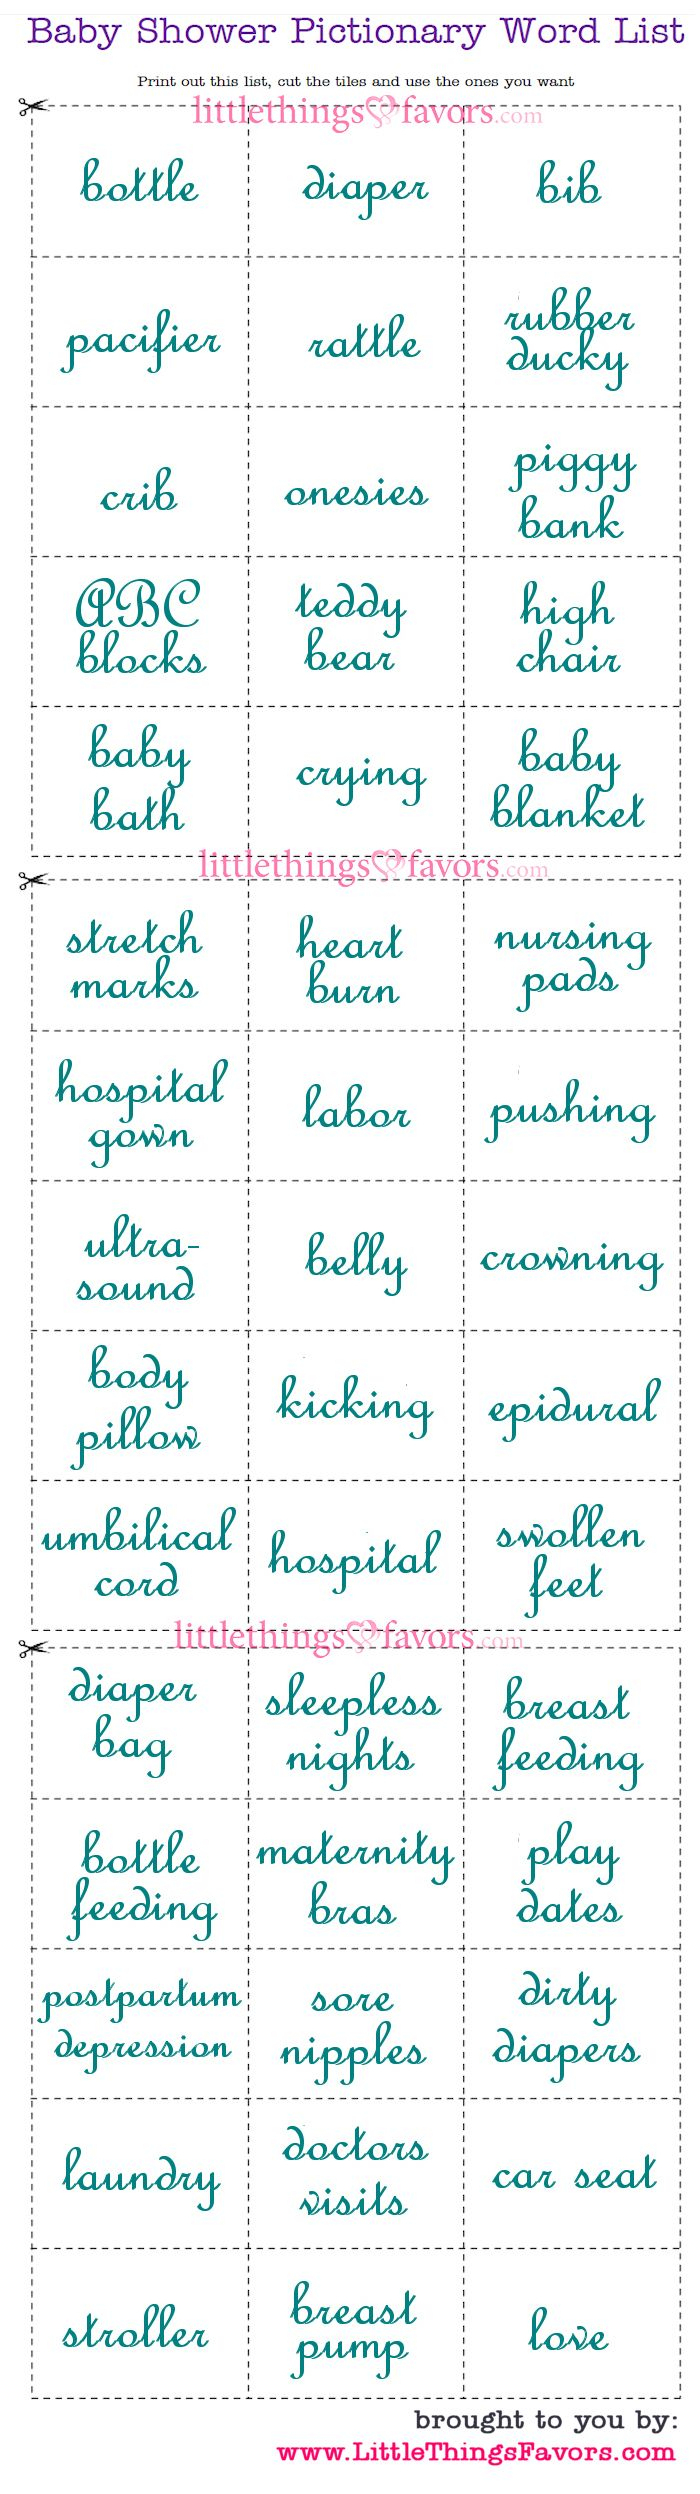 Free Baby Shower Pictionary Word List To Print. #printables - Click - Free Printable Pictionary Cards